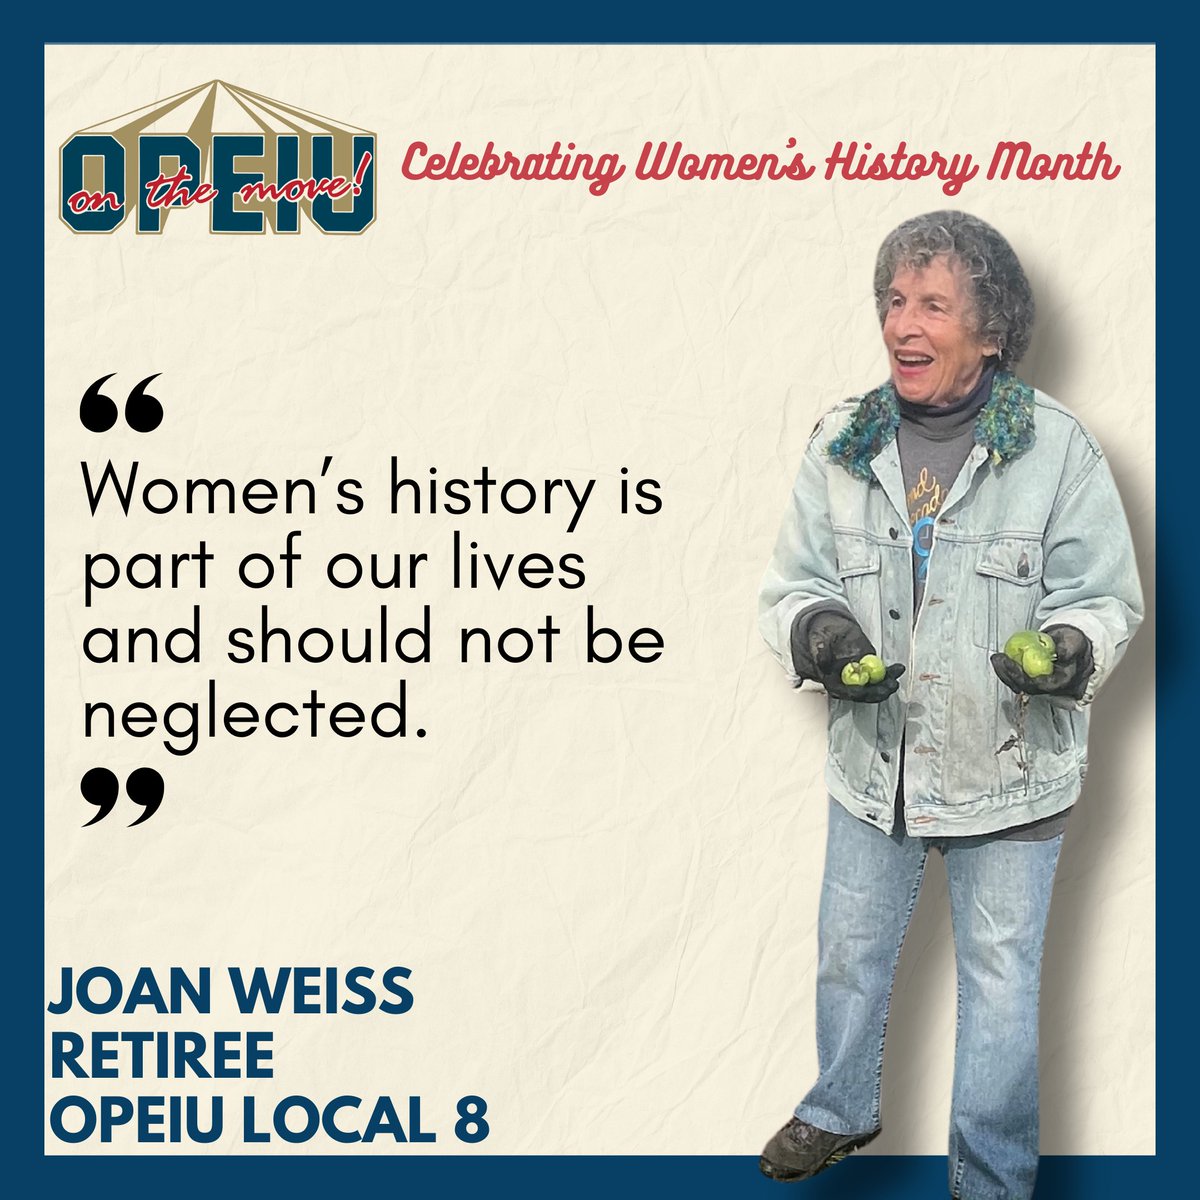 “Once an organizer, always an organizer.” Joan Weiss spent her career organizing with @SEIU, @JWJNational in Seattle, and @OPEIULocal8, where she serves as a trustee. Weiss remains active within her union, serving on several committees and passing down wisdom to younger workers.